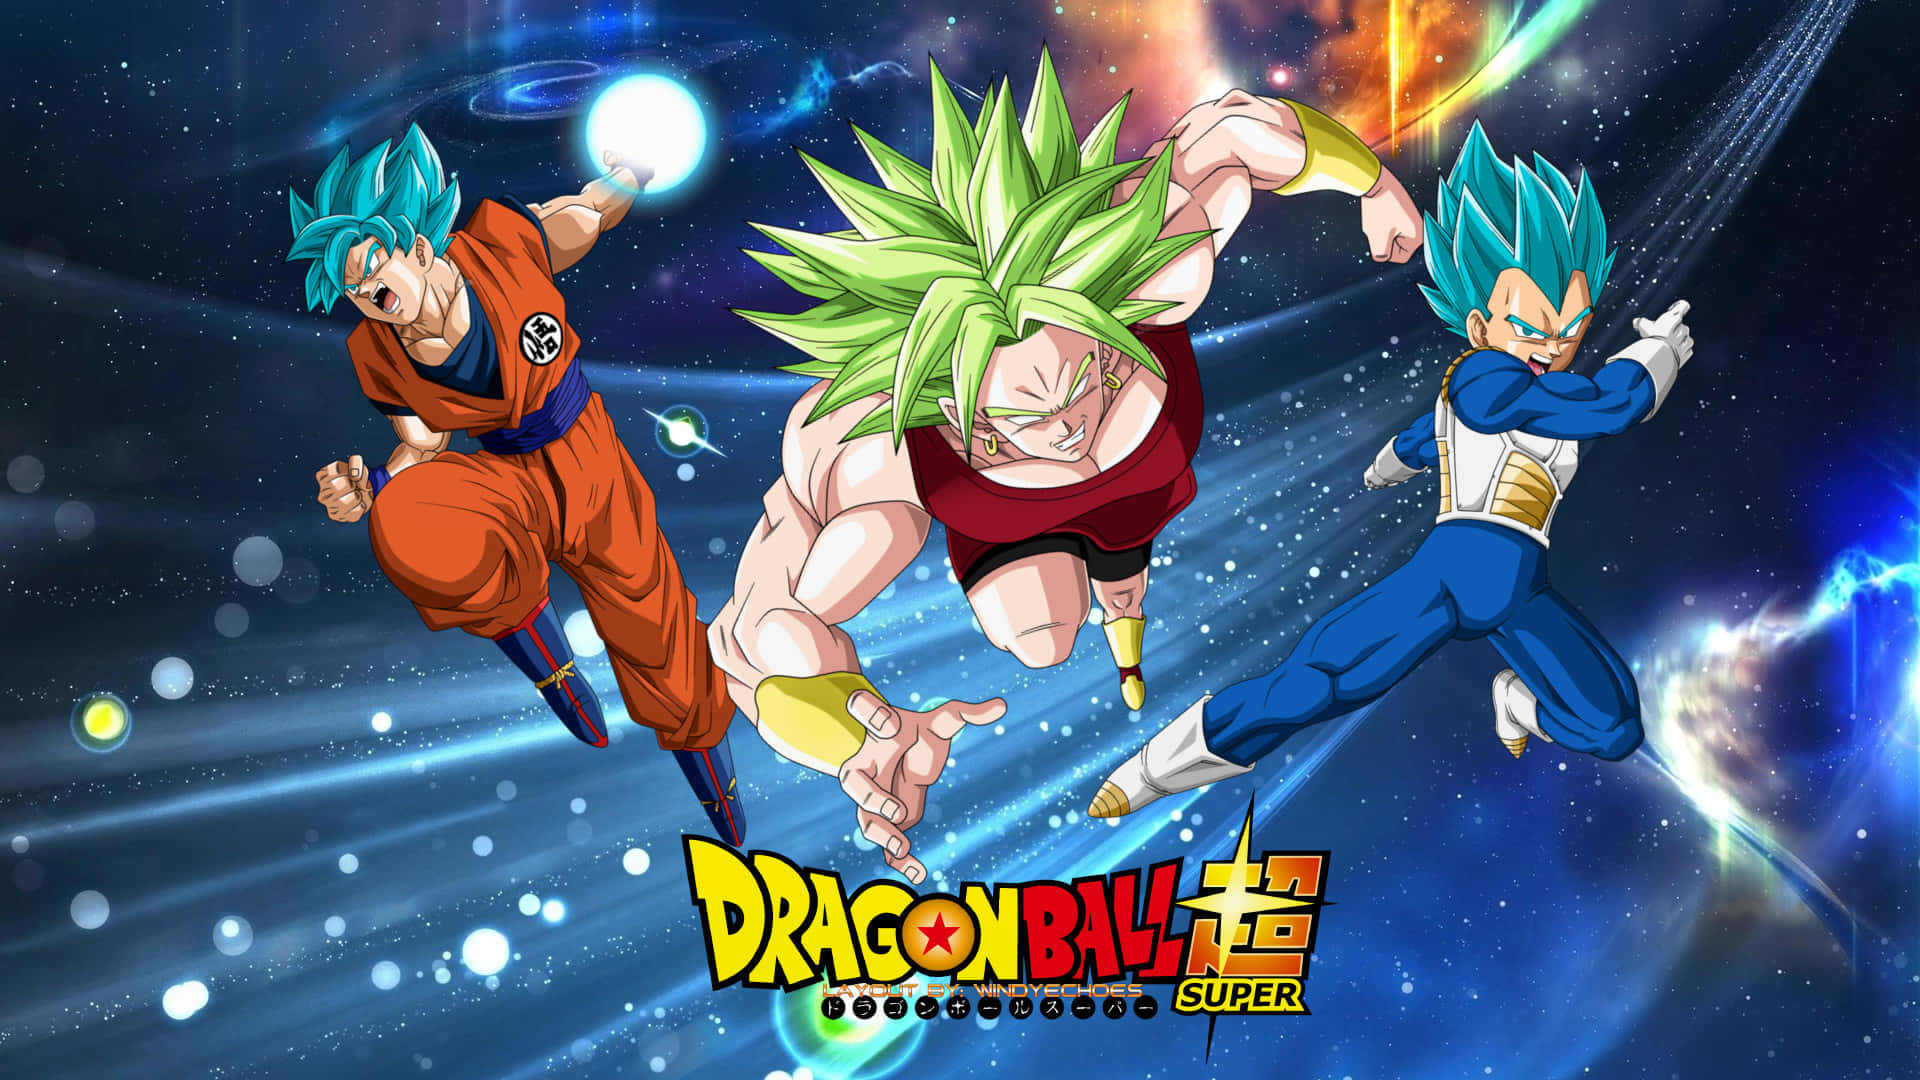 Dragon Ball Z And Dragon Ball Super Wallpaper by WindyEchoes on